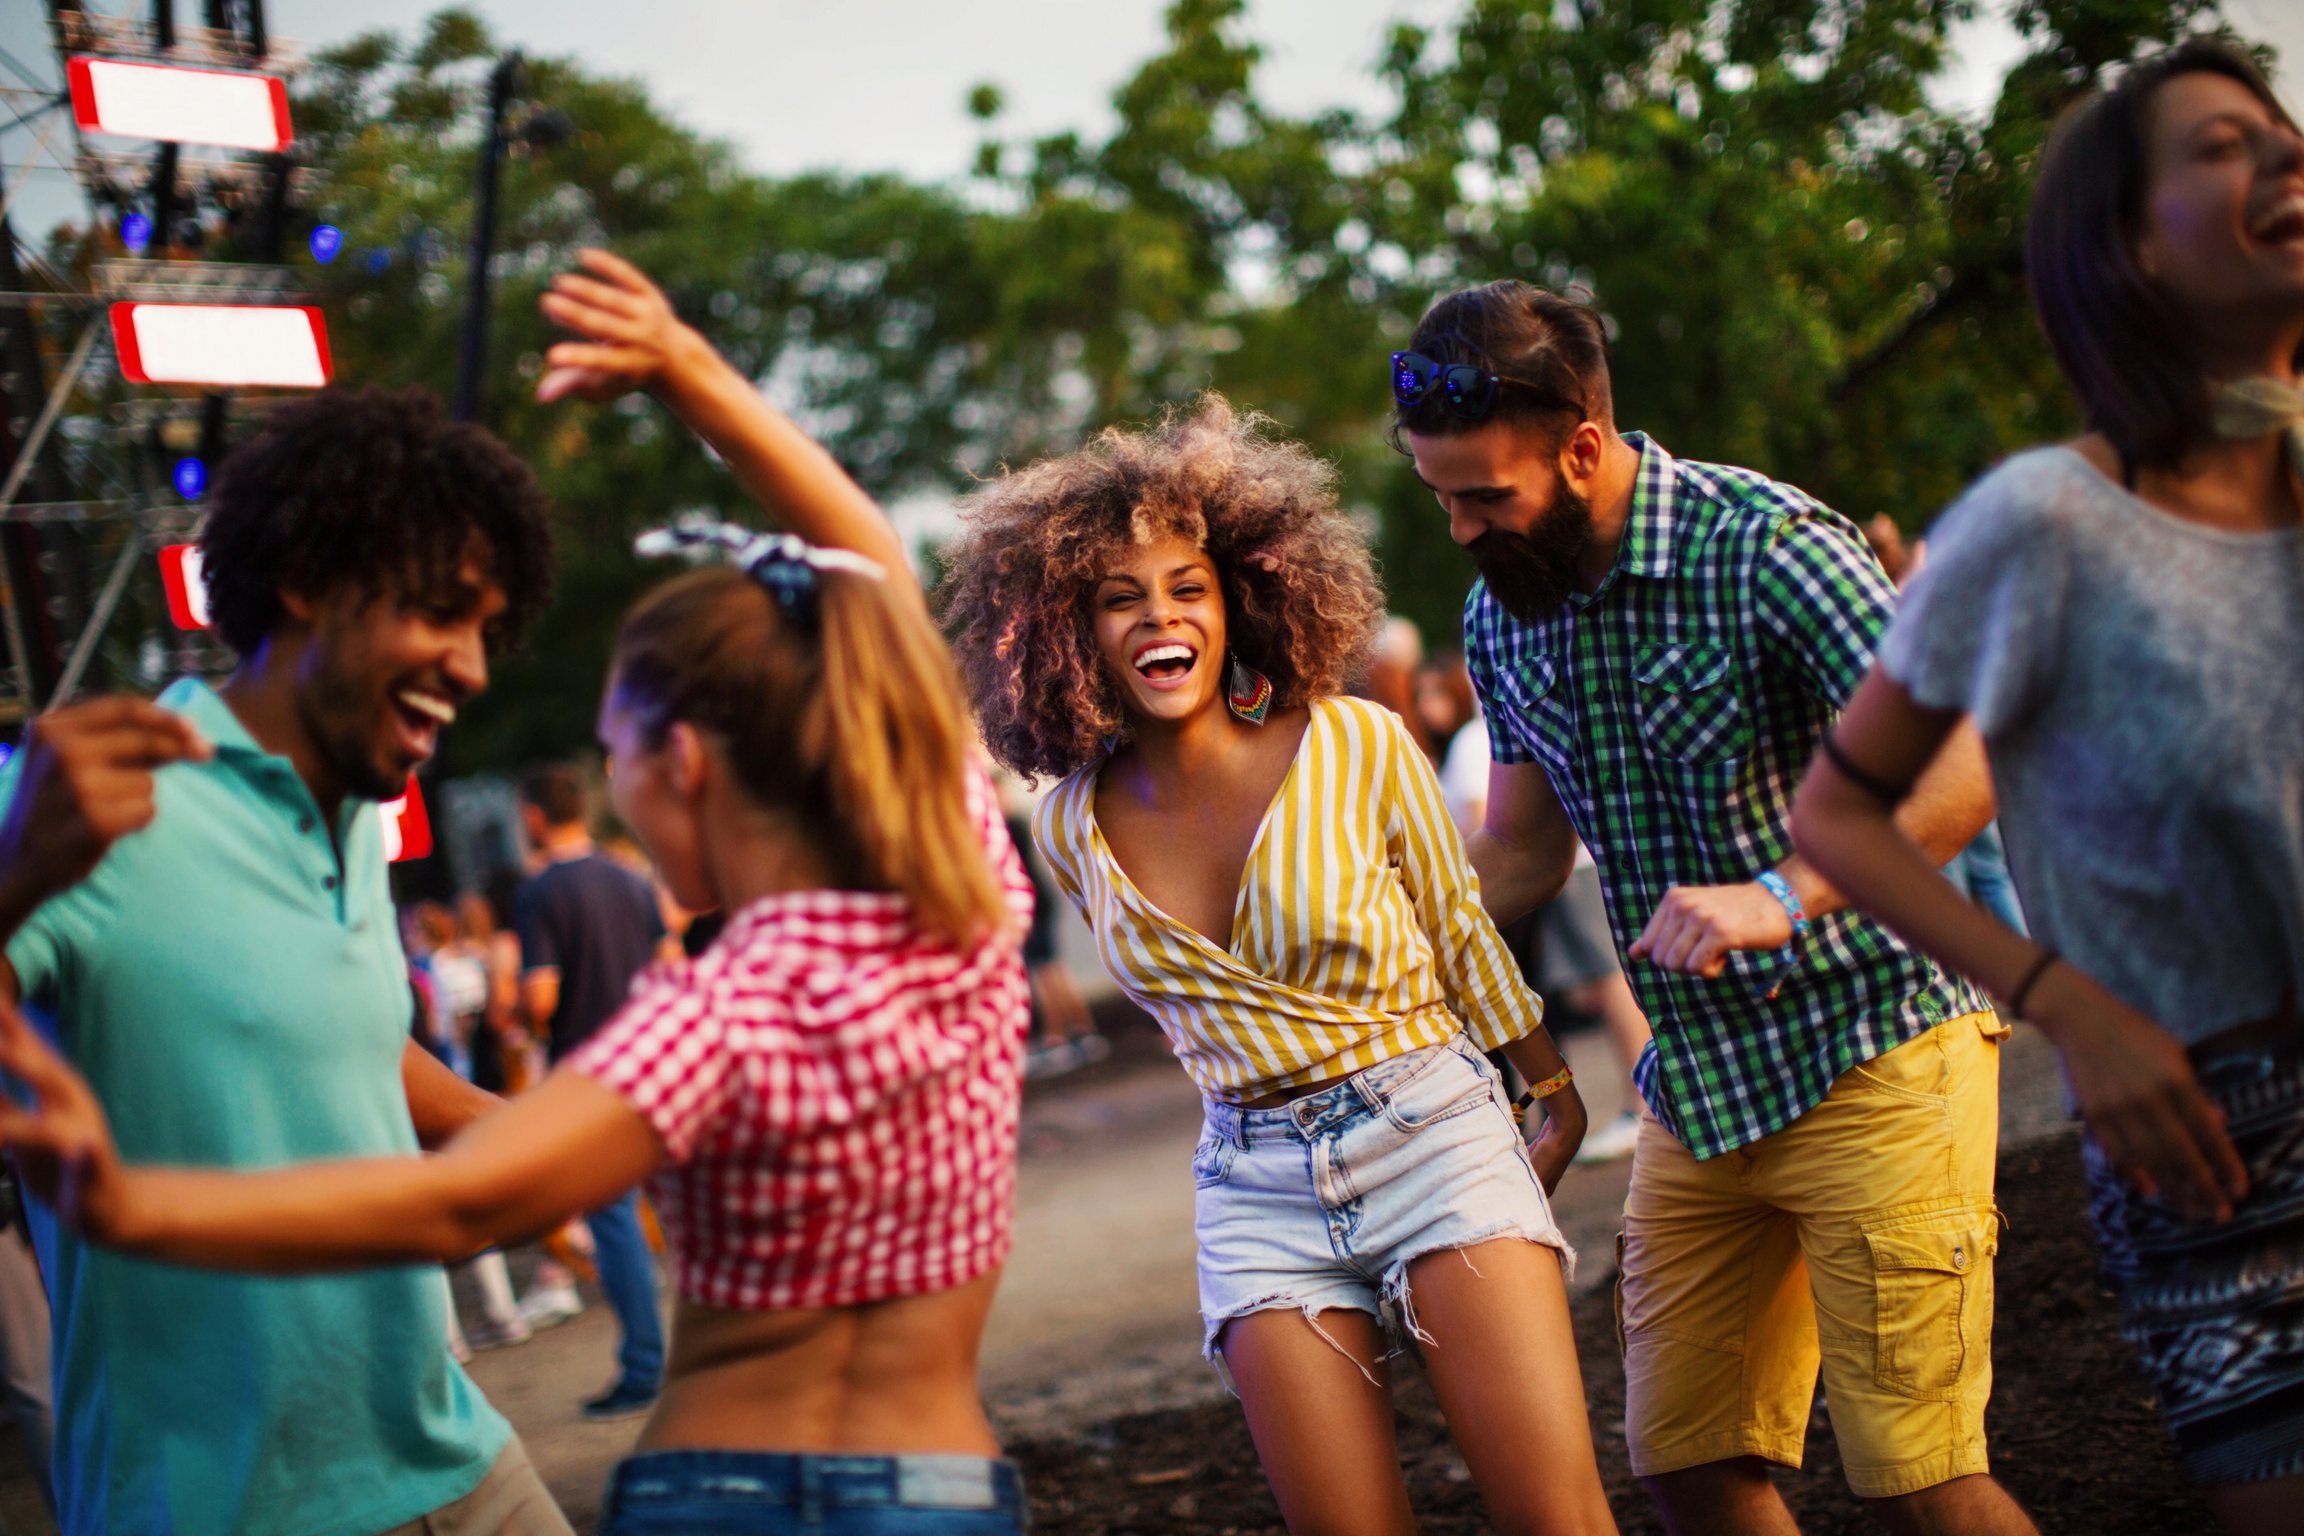 Friends dancing at music festival.